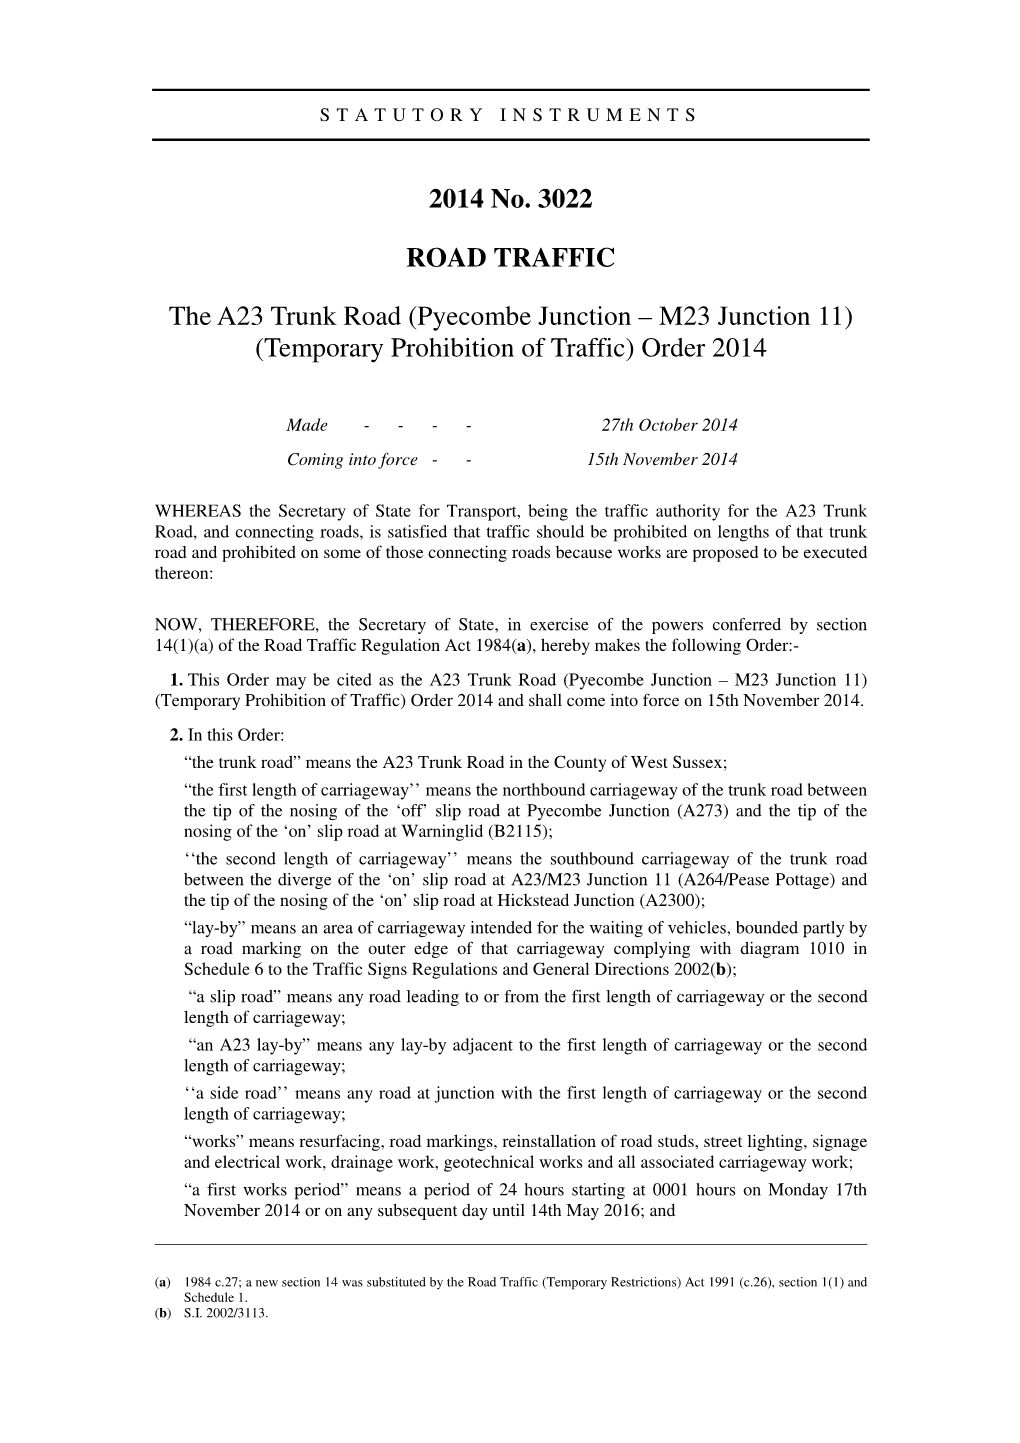 2014 No. 3022 ROAD TRAFFIC the A23 Trunk Road